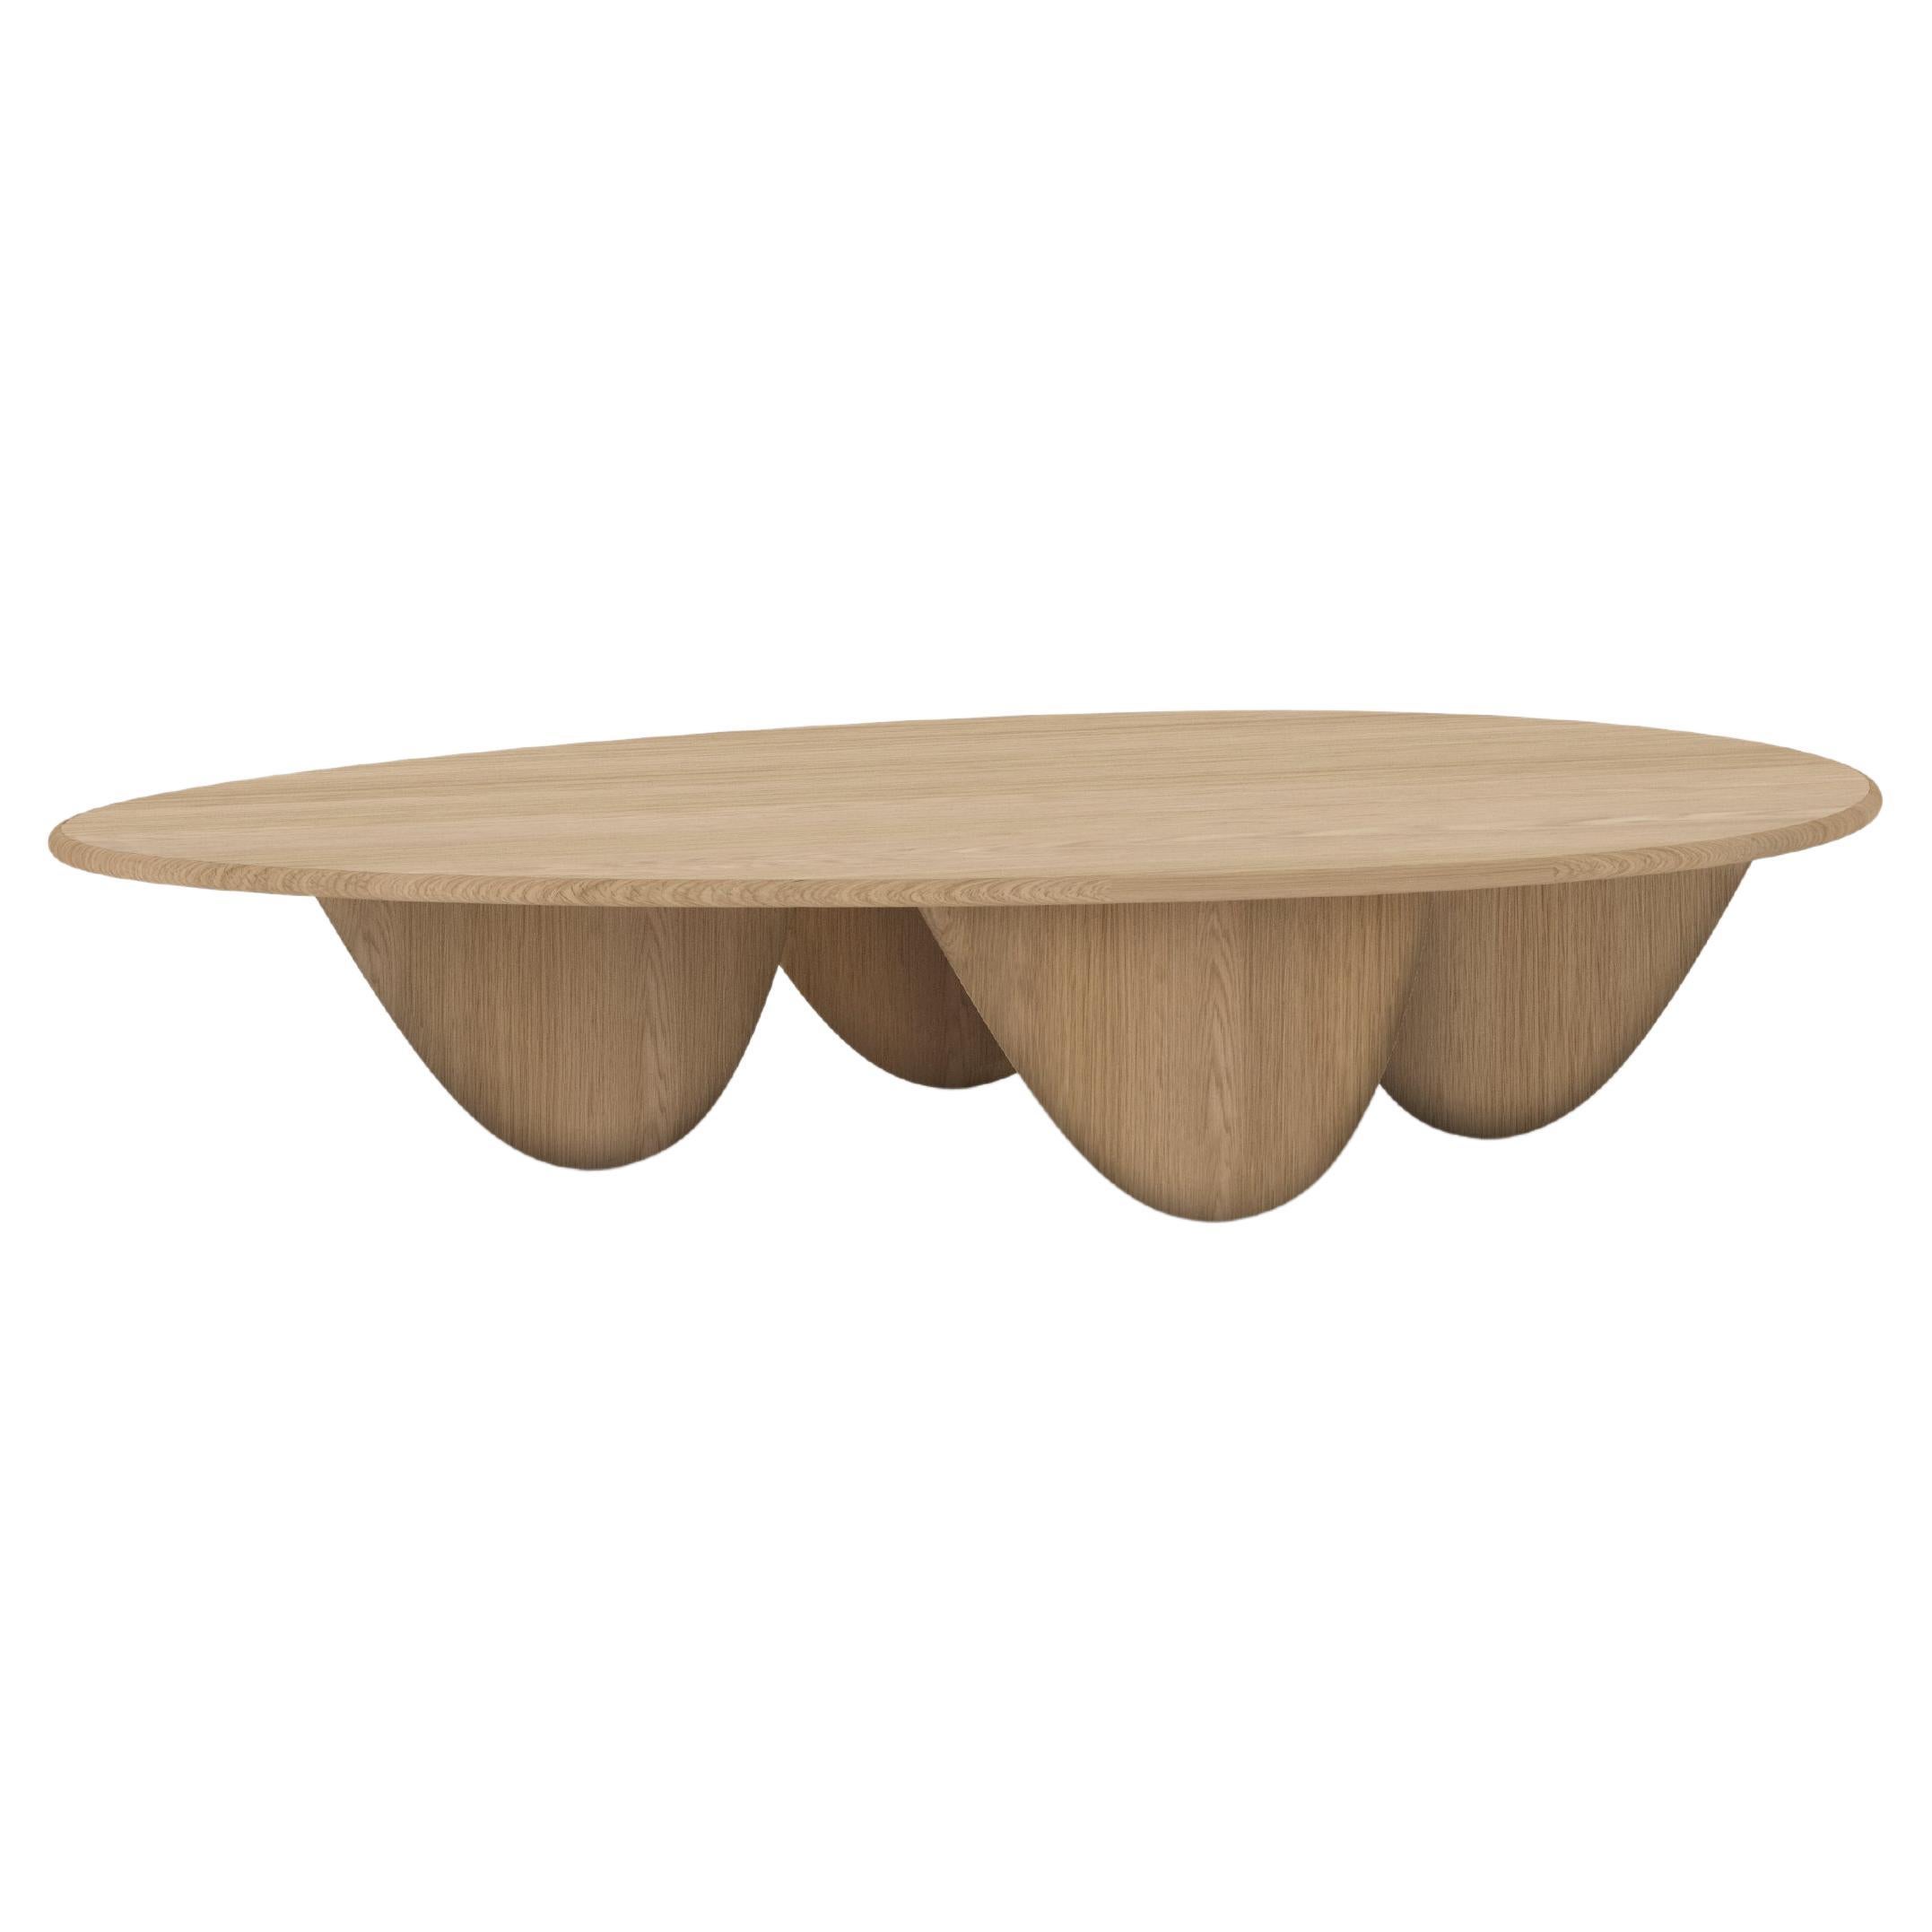 Noviembre X Big Coffee Table in Oak Wood, Coffee Table by Joel Escalona

The Noviembre collection is inspired by the creative values of Constantin Brancusi, a Romanian sculptor considered one of the most influential artists of the twentieth century,